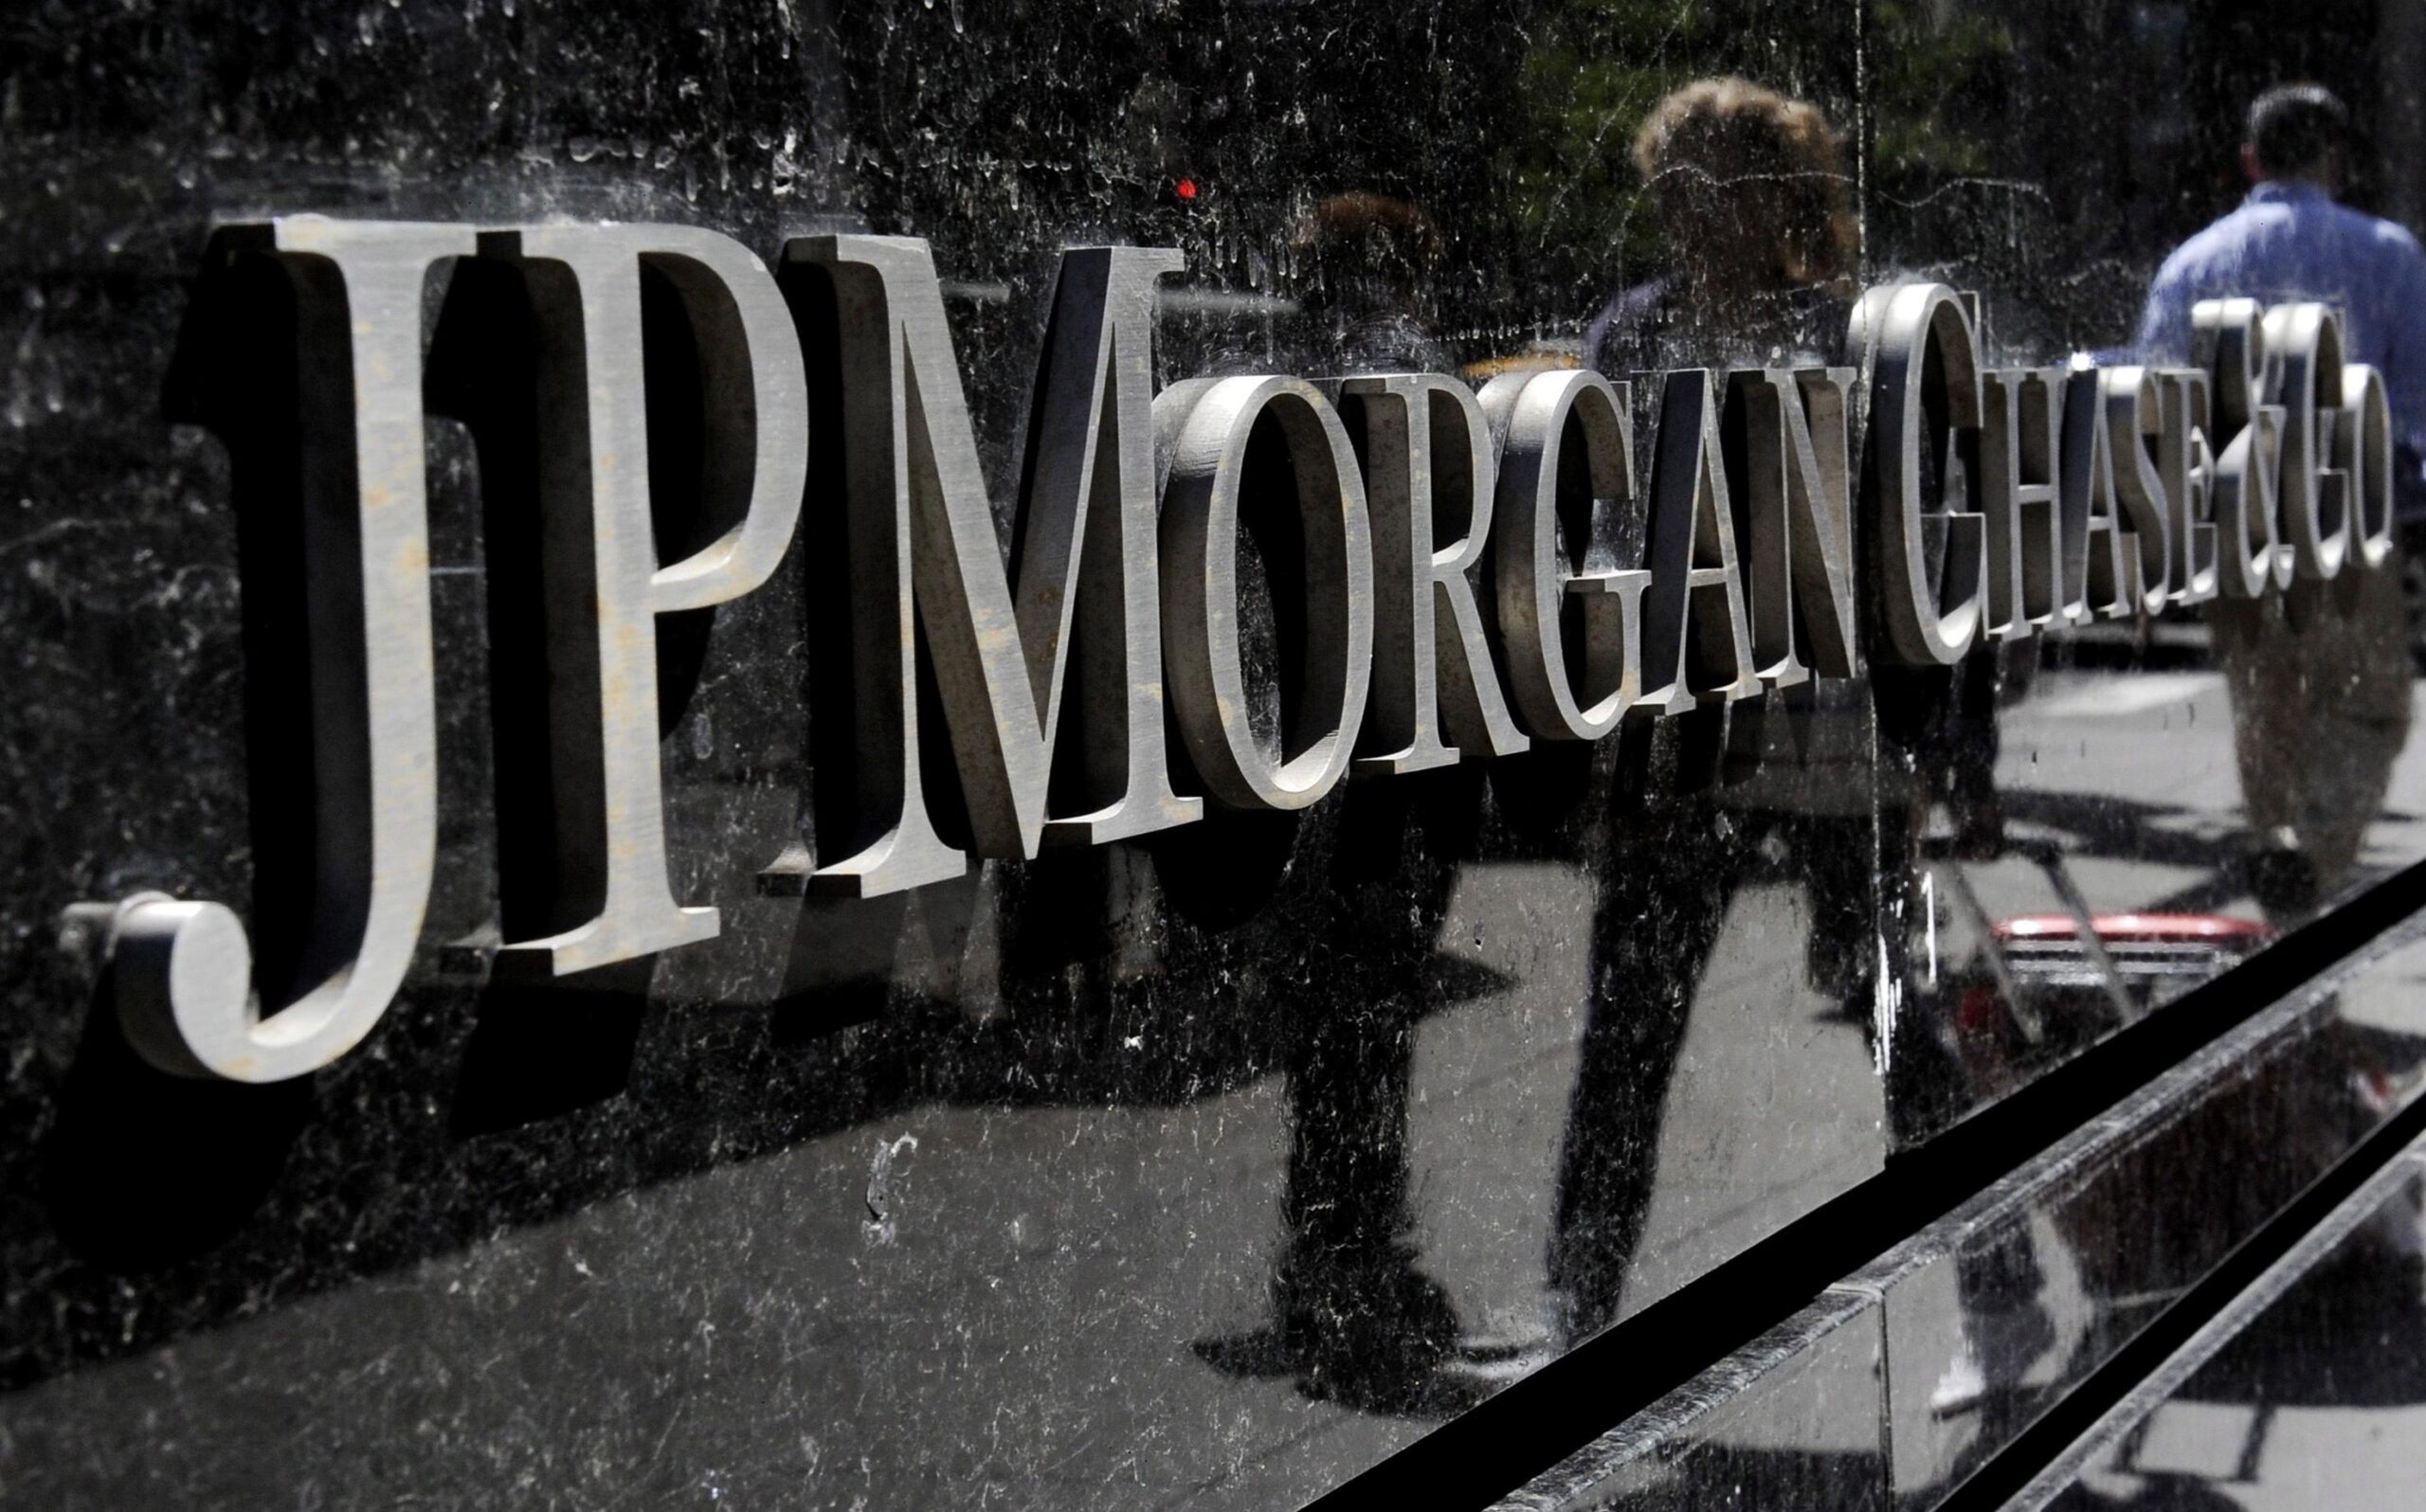 epa07847708 (FILE) - A view of a sign at a JPMorgan Chase building in New York, New York, USA, 11 May 2012 (reissued 17 September 2019). According to media reports on 17 September, the US Justice Department accused three traders at JPMorgan Chase of participating in a multi-year racketeering scheme, which sought to manipulate international precious metals markets. The Justice Department is charging the head of JP Morgan's global precious metals trading unit and two other people using the Racketeer Influenced and Corrupt Organizations Act, or RICO Act.  EPA/JUSTIN LANE